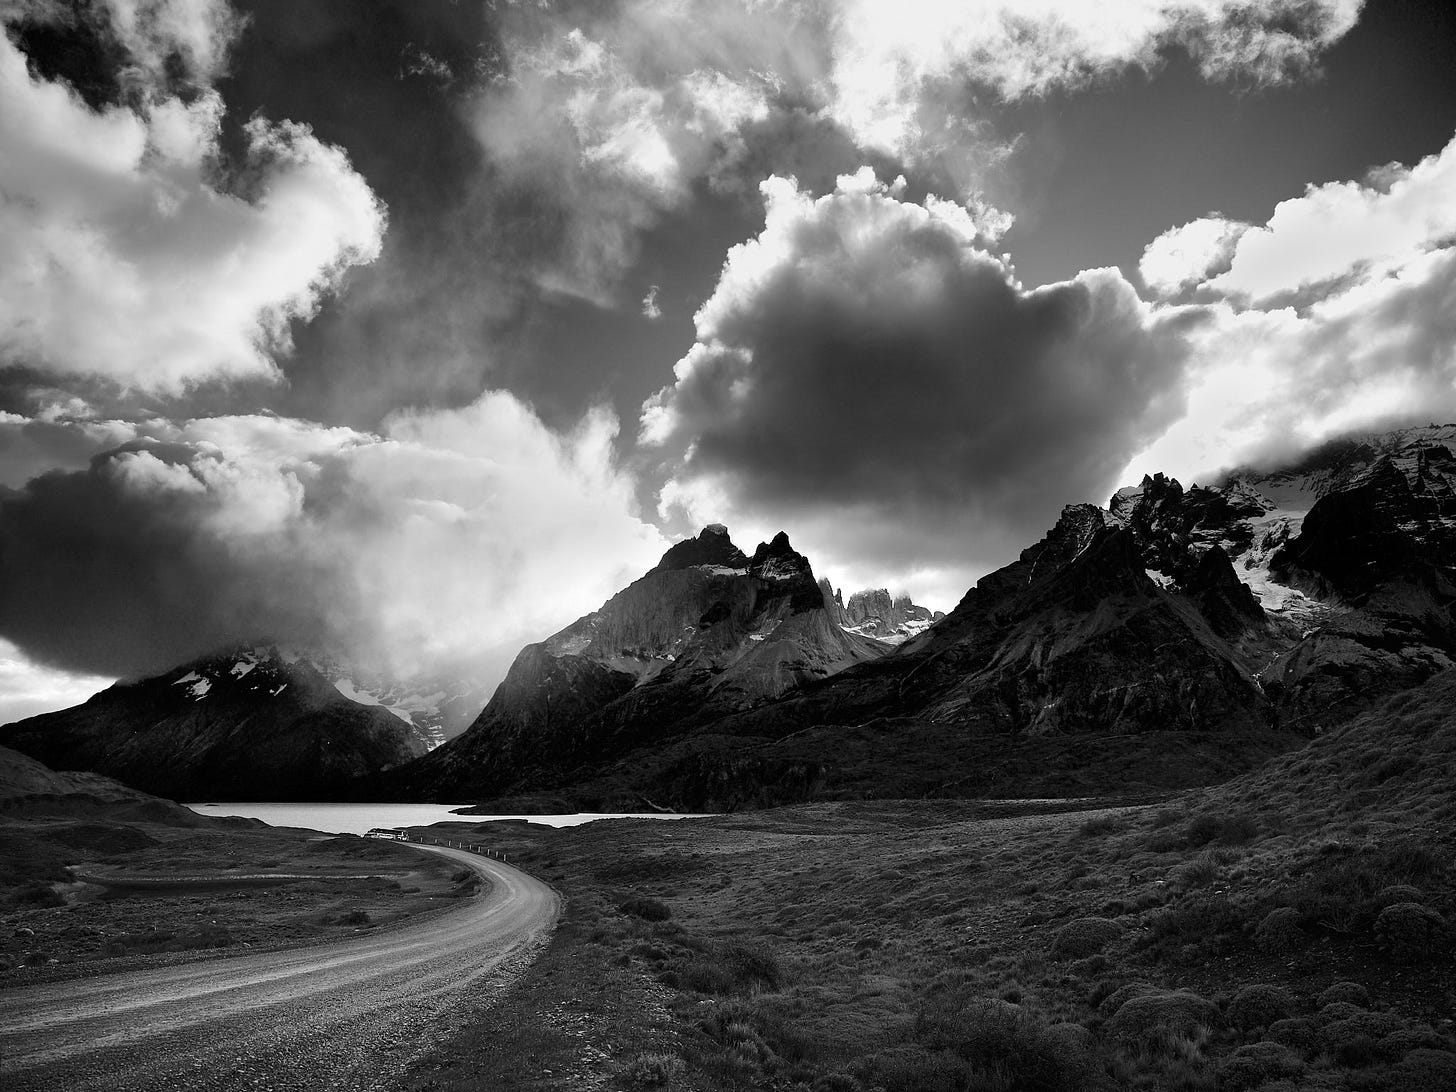 Patagonia rugged landscape in black and white